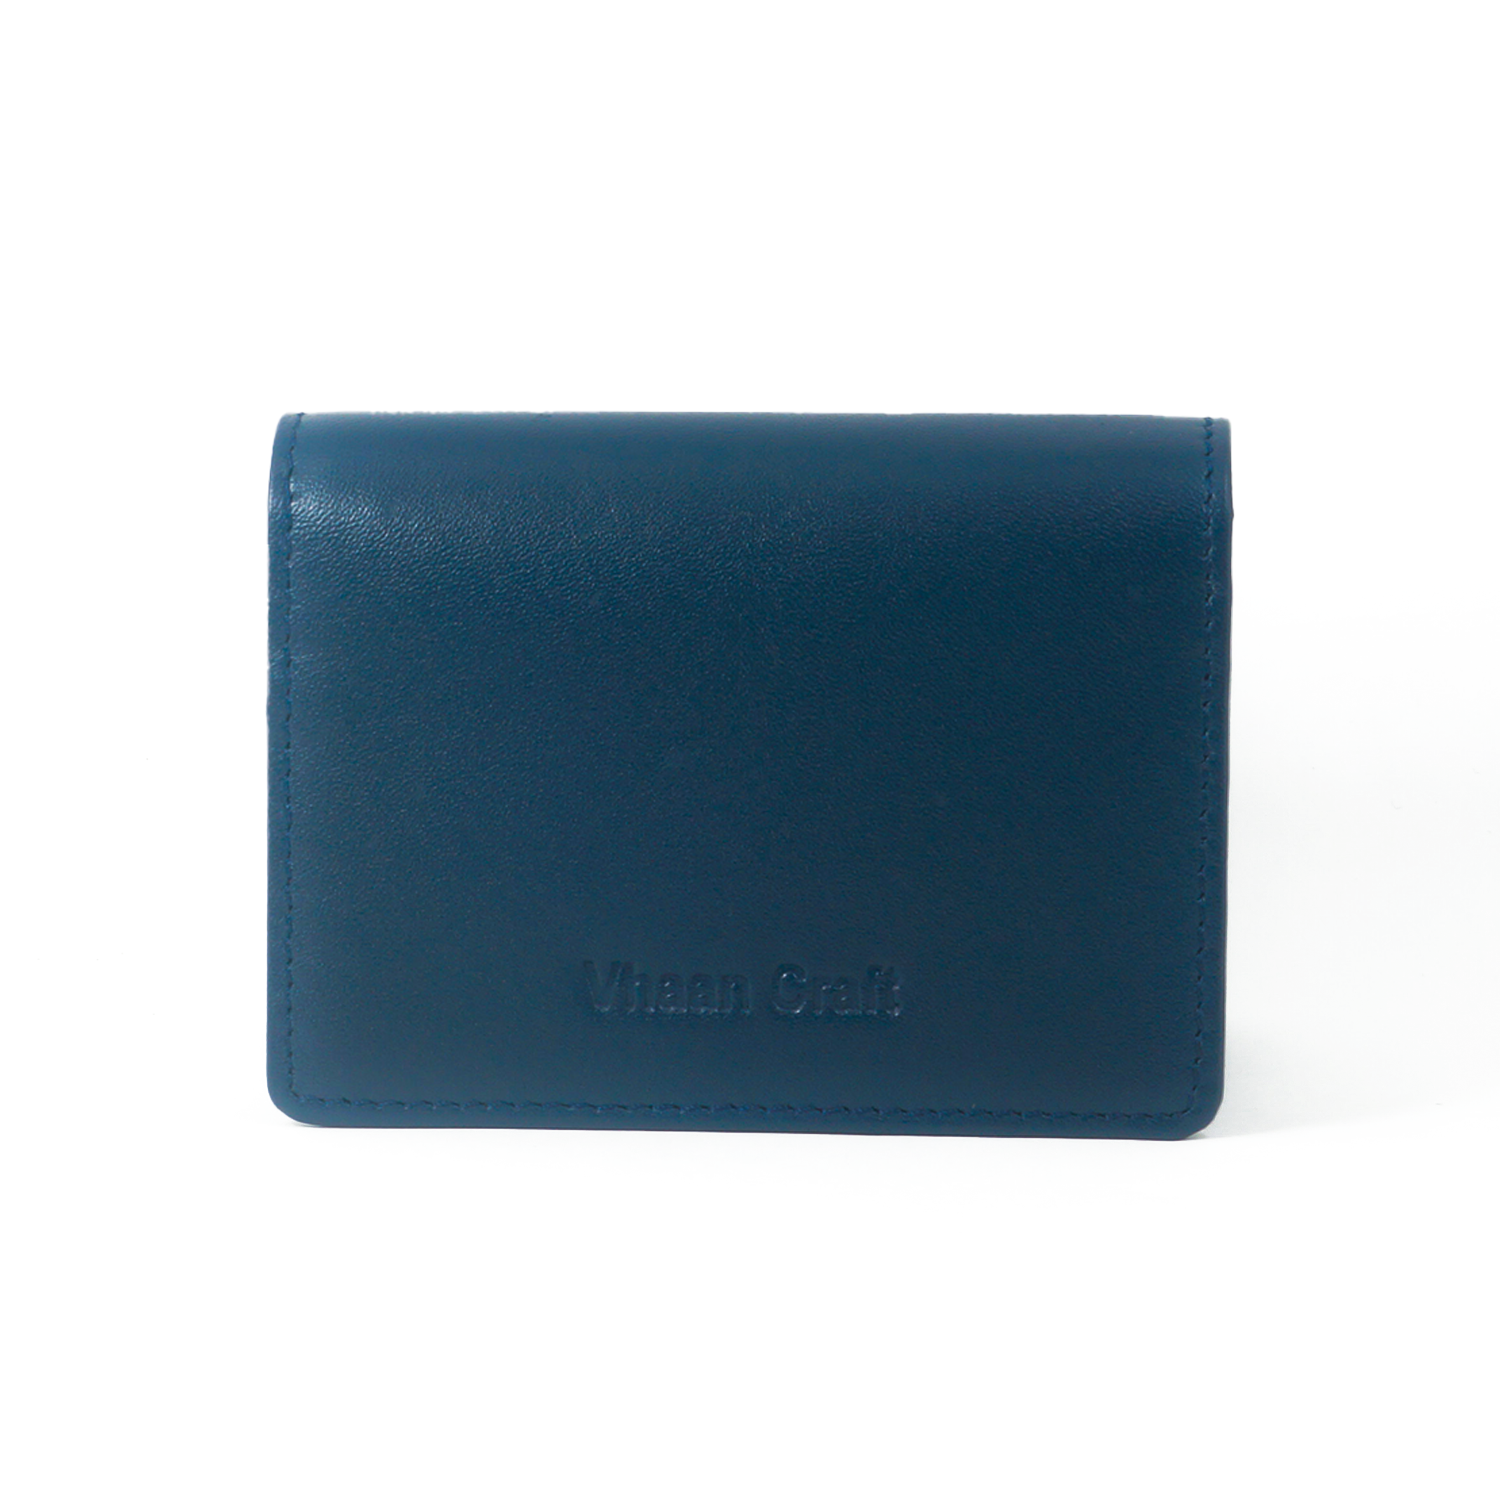 Premium Leather Card Holder with Protective Cover by Vhaan - Blue